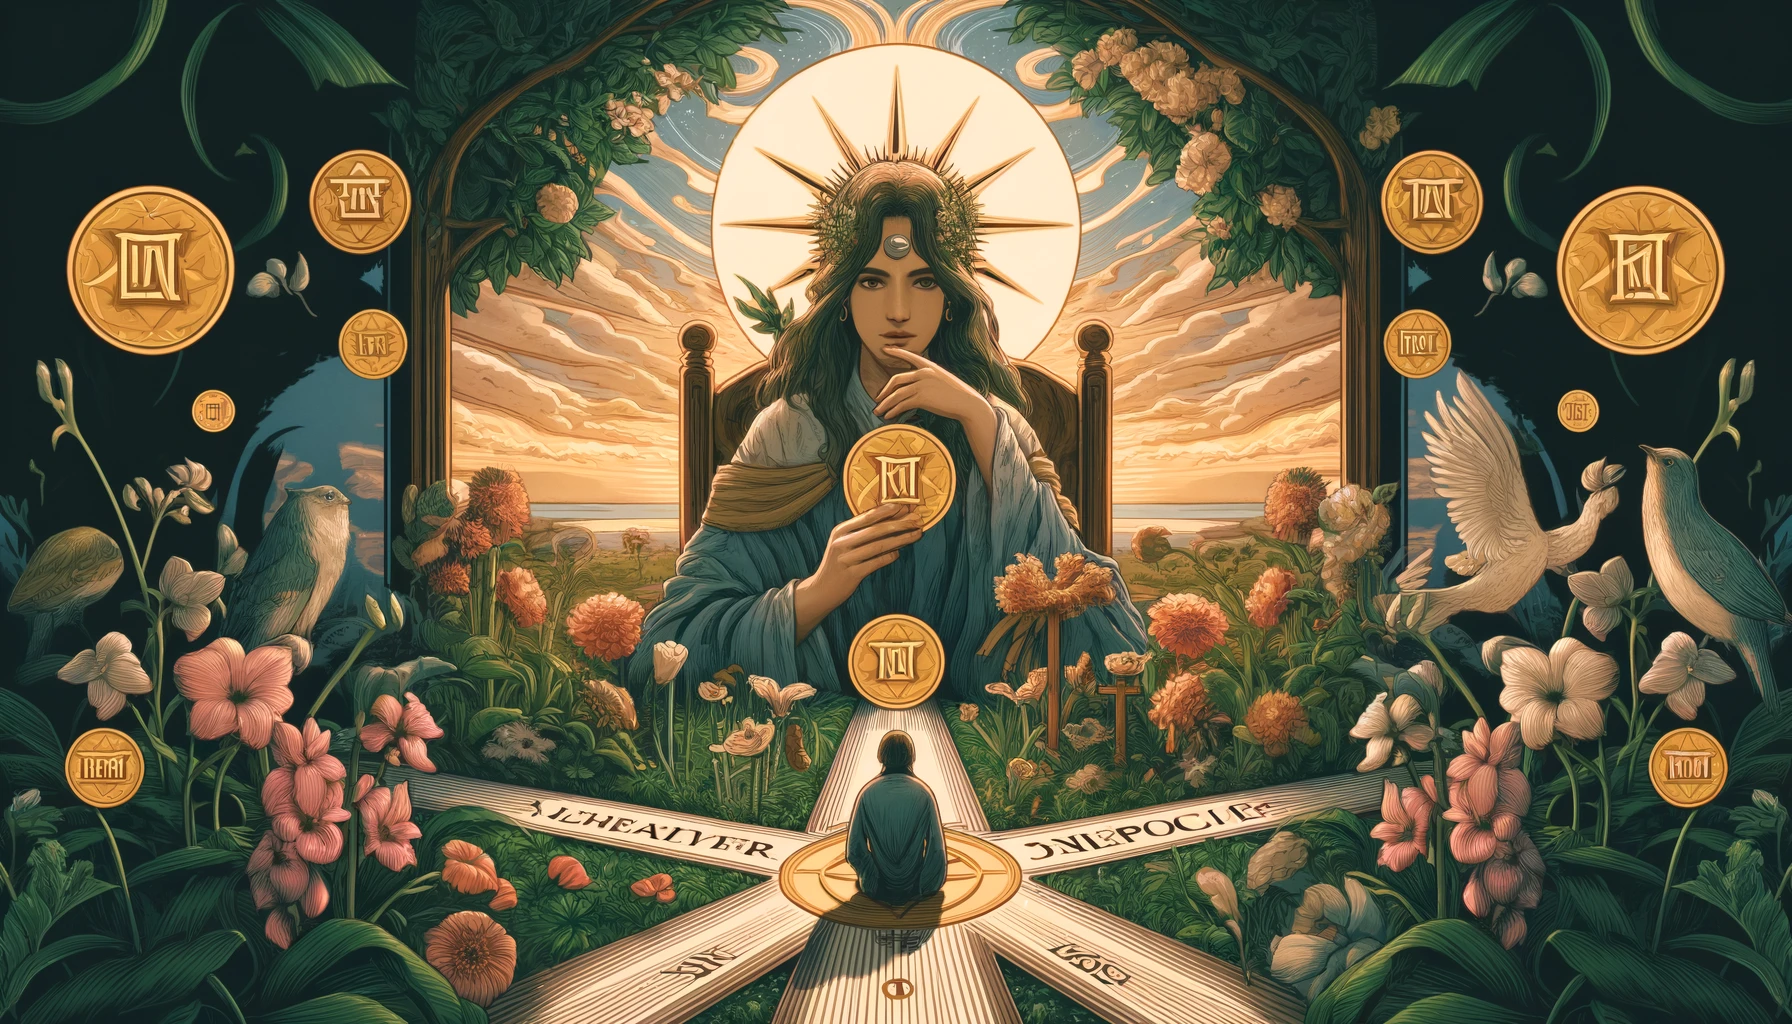 The image shows a woman seated on a throne, exuding an aura of stability and wisdom. She holds a pentacle in one hand, symbolizing material wealth and abundance, while the other hand gestures towards the ground, suggesting groundedness and practicality. Surrounding her are symbols of nature and fertility, indicating her nurturing and caring qualities. This visualization represents the guidance and influence of the Queen of Pentacles in decision-making, emphasizing stability, care, and practical wisdom.